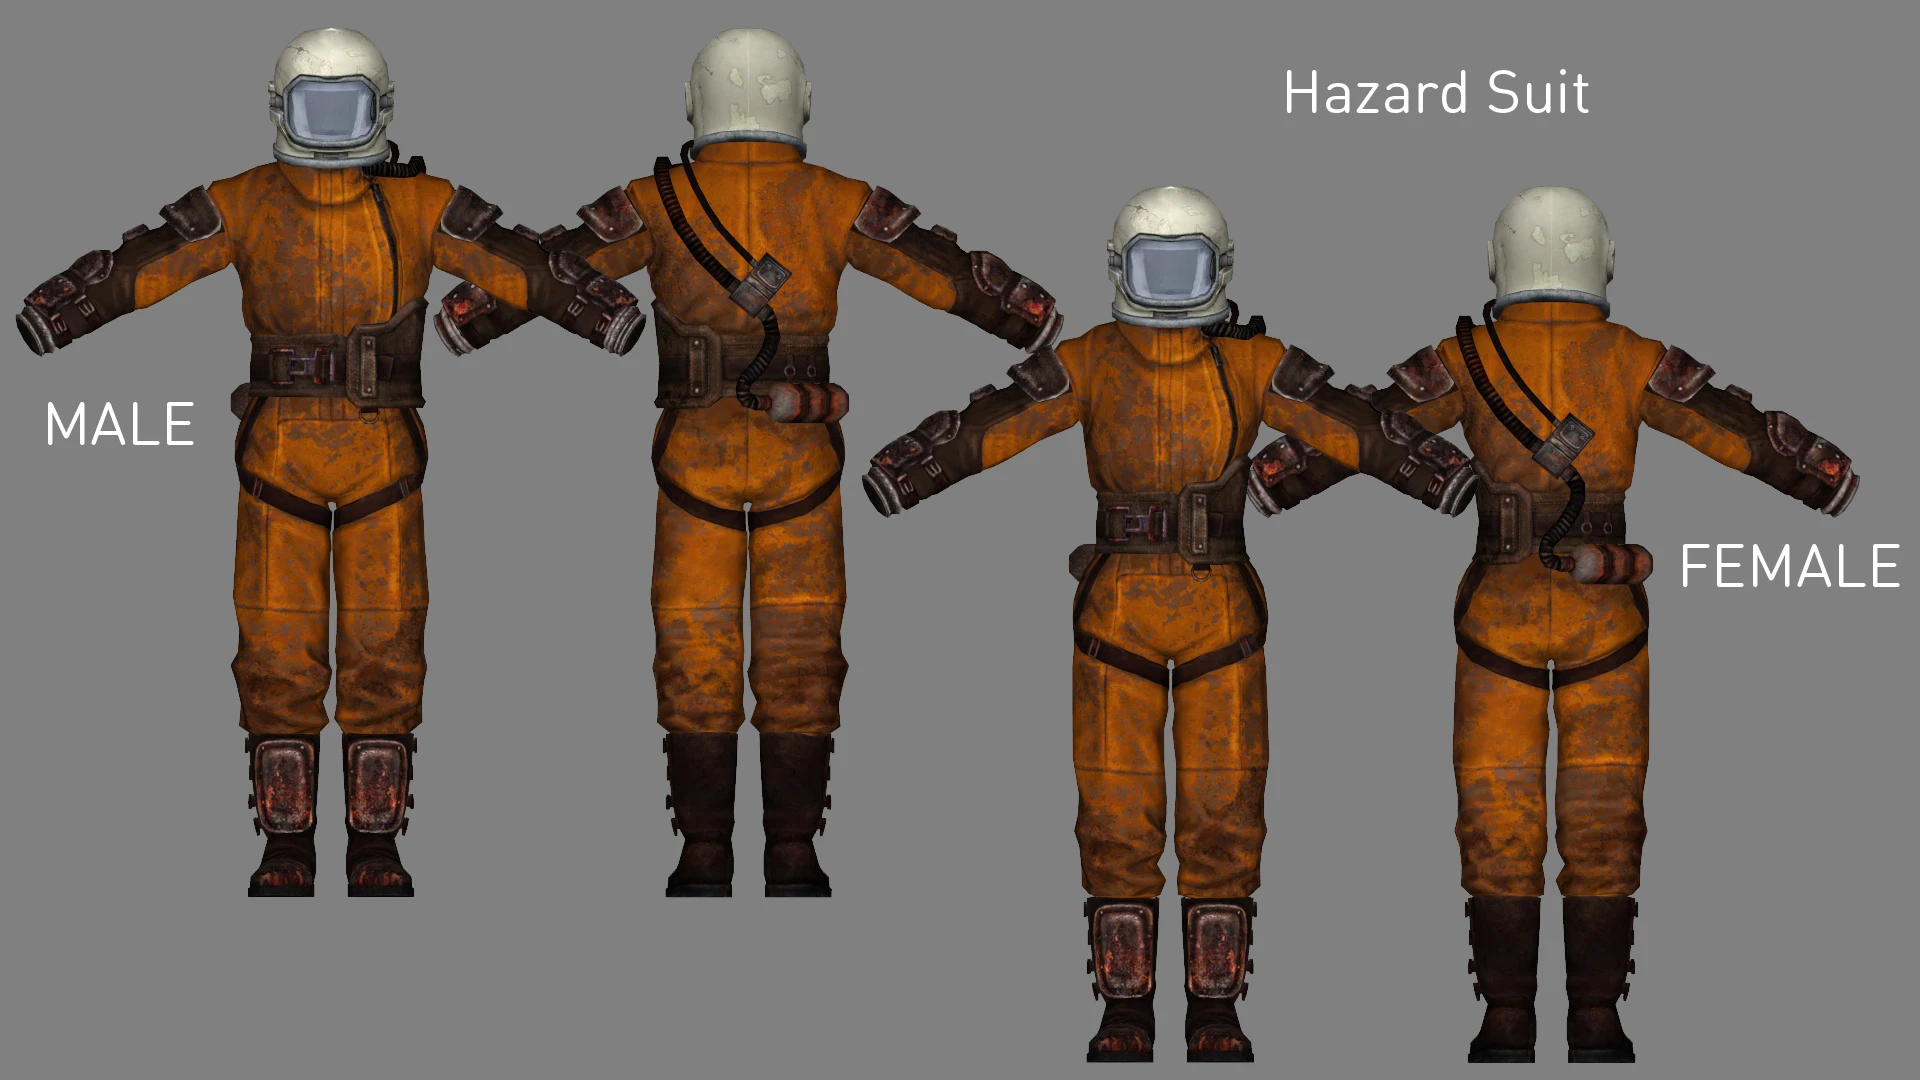 Hazard Suit. Many suits lethal company